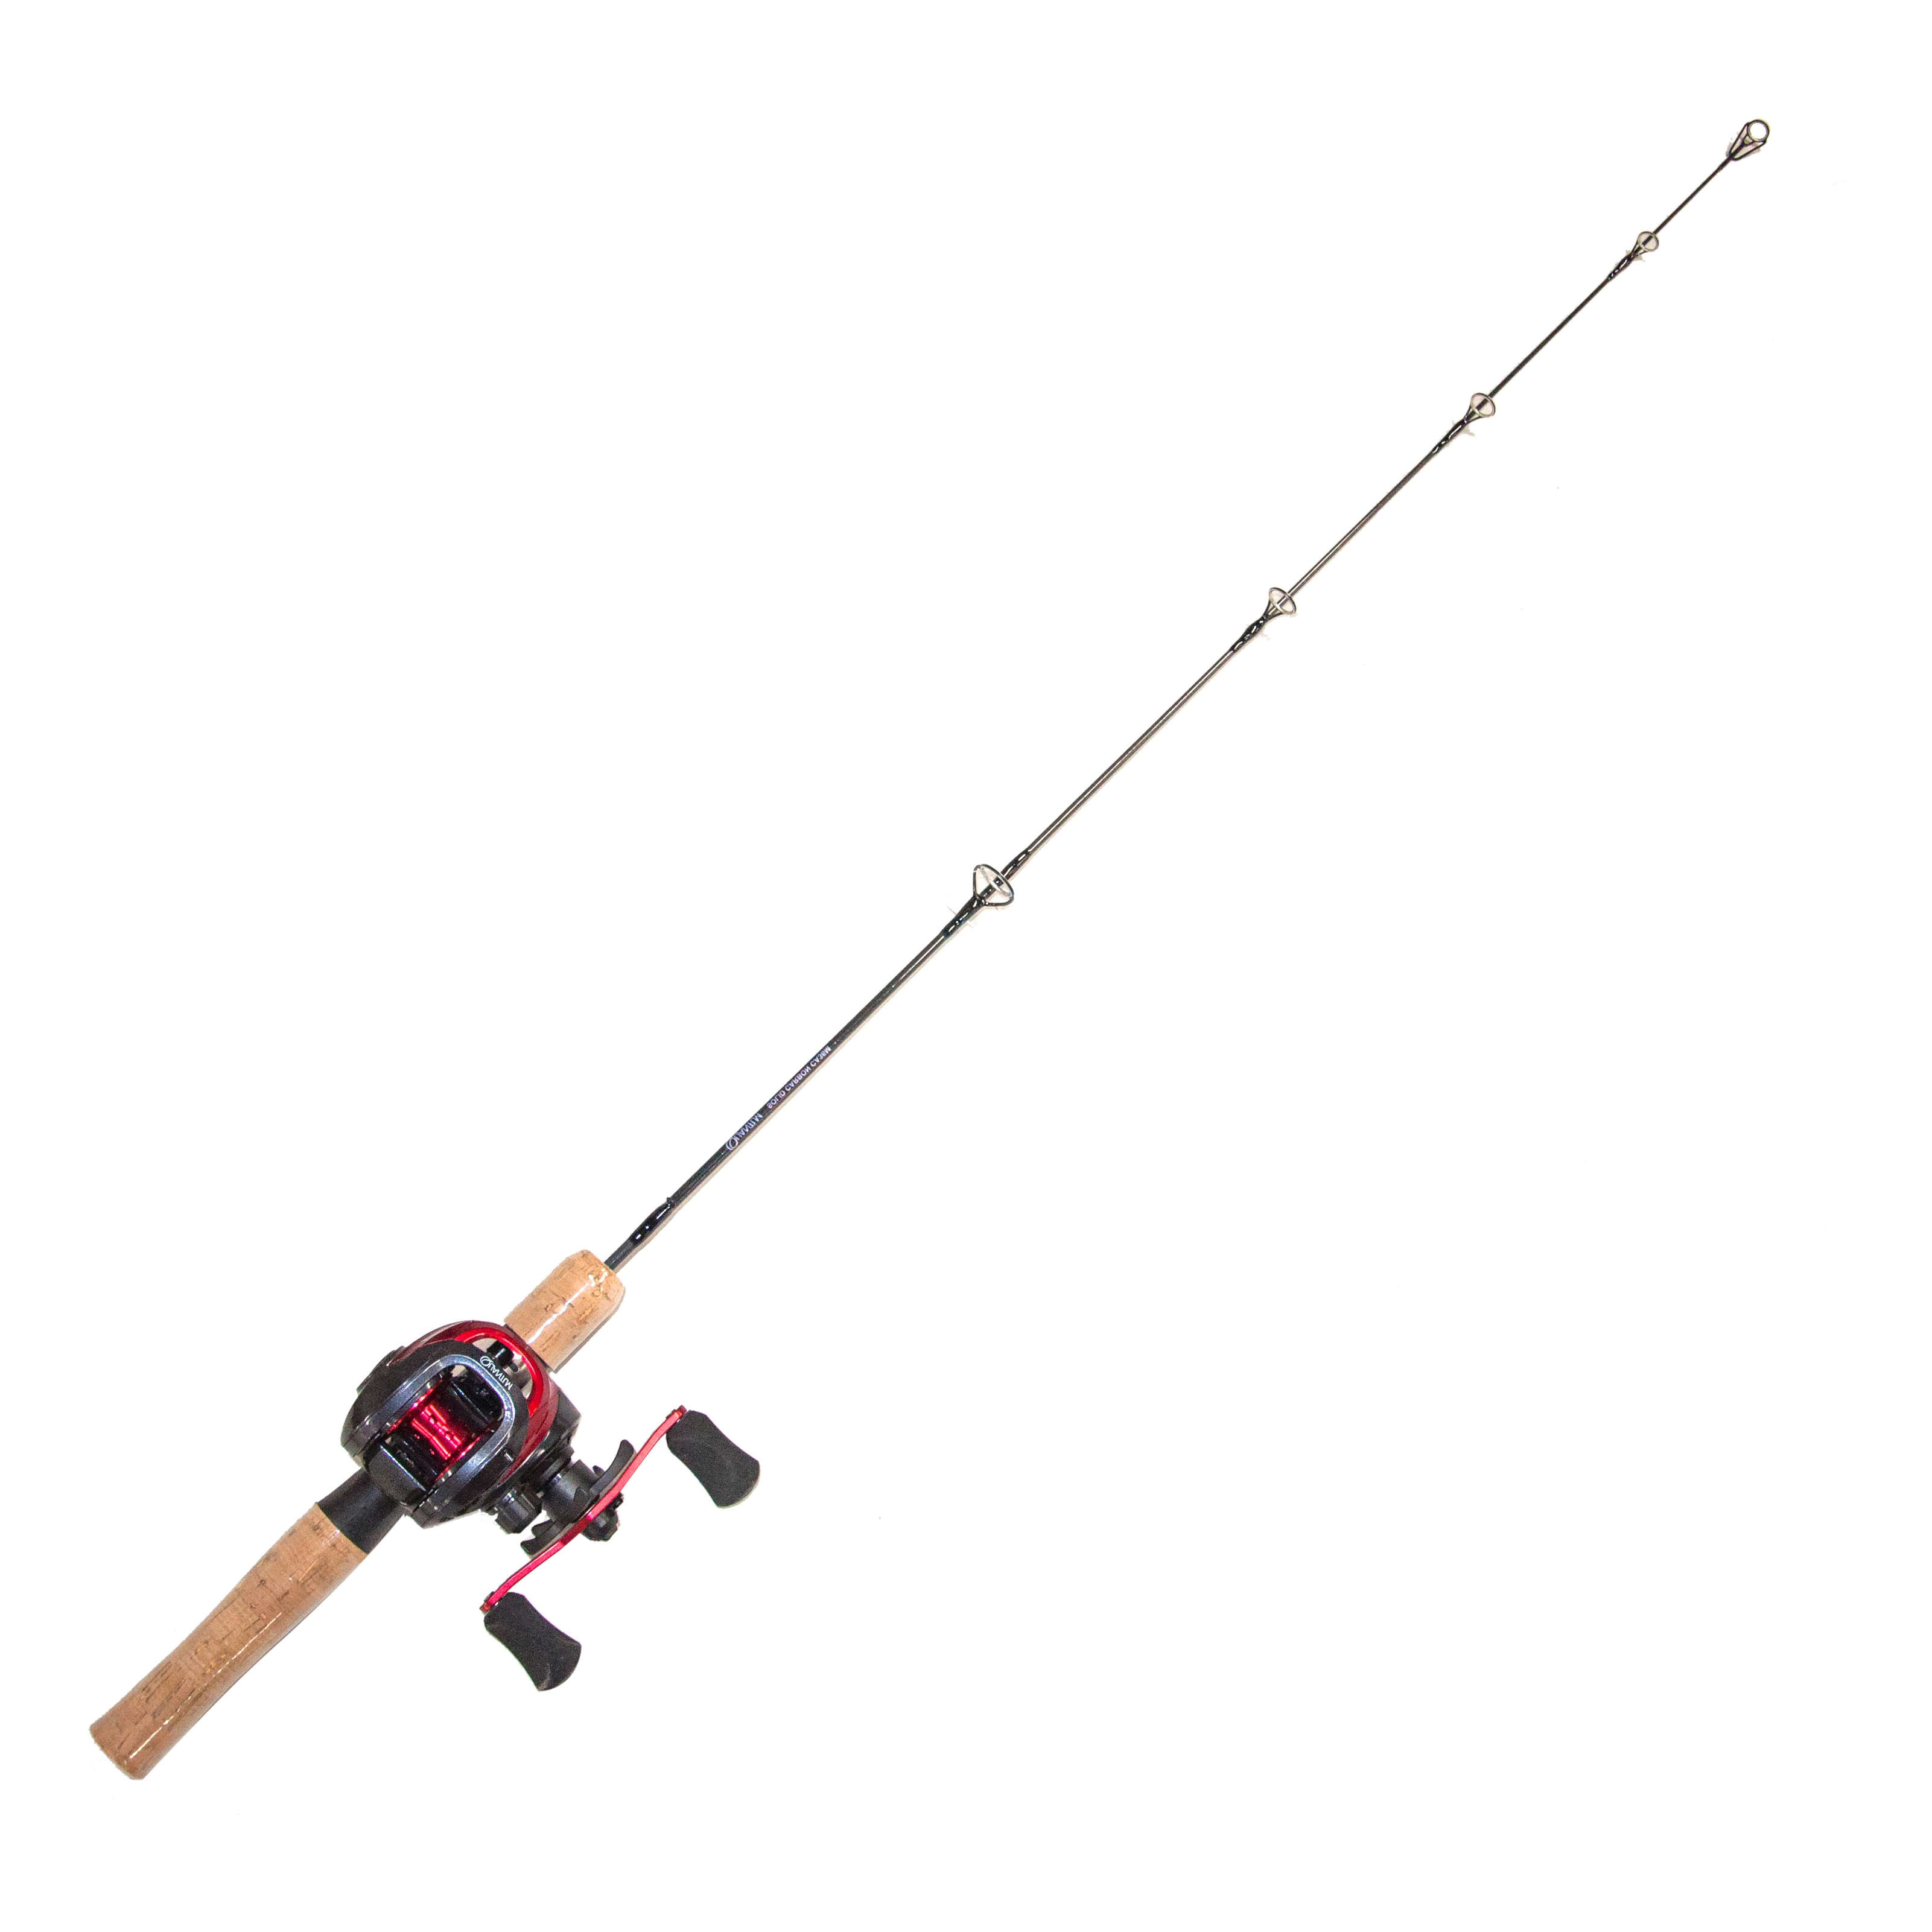 Frostbite Ice Fishing Rods With Reels And Line for Sale in Arlington